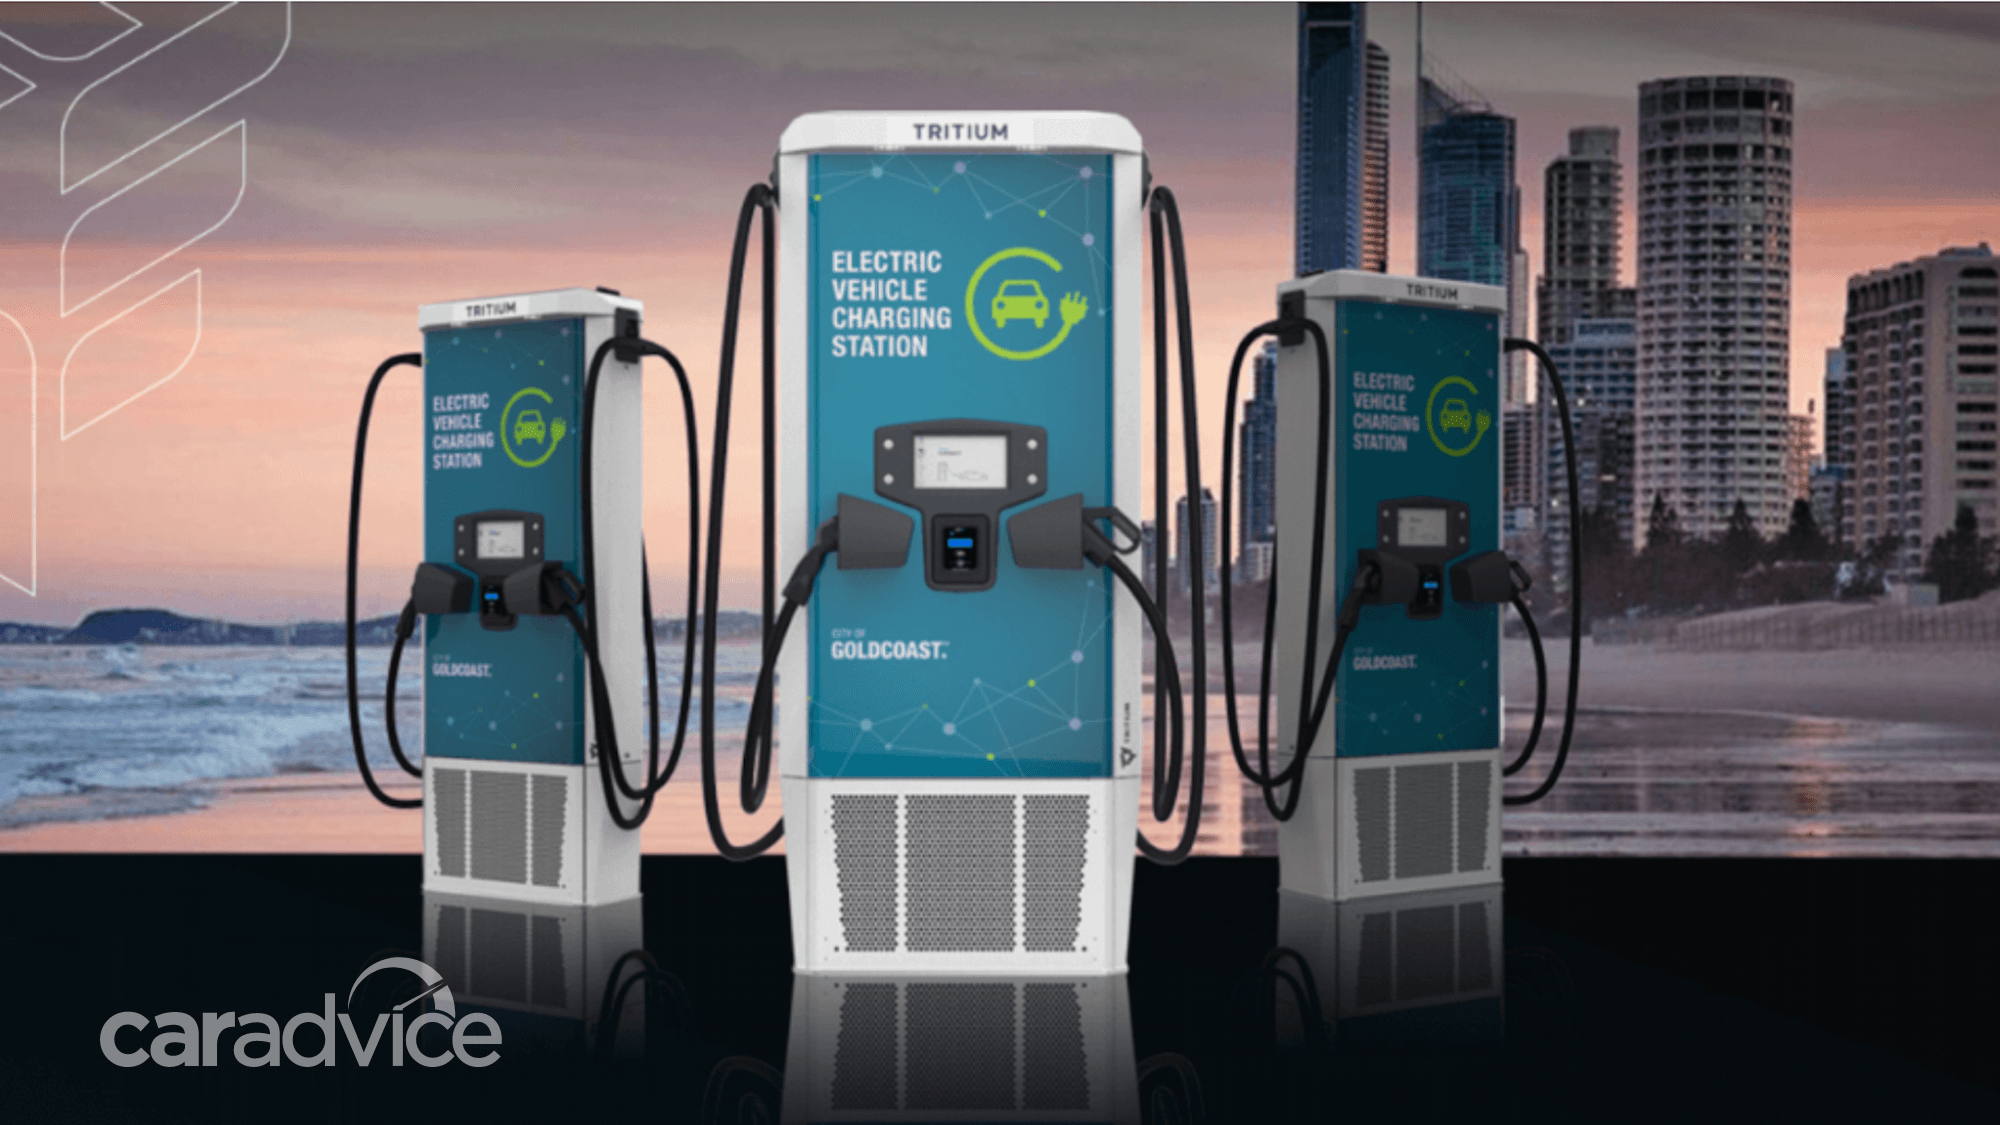 Gold Coast rolls out public electric vehicle charging stations CarAdvice